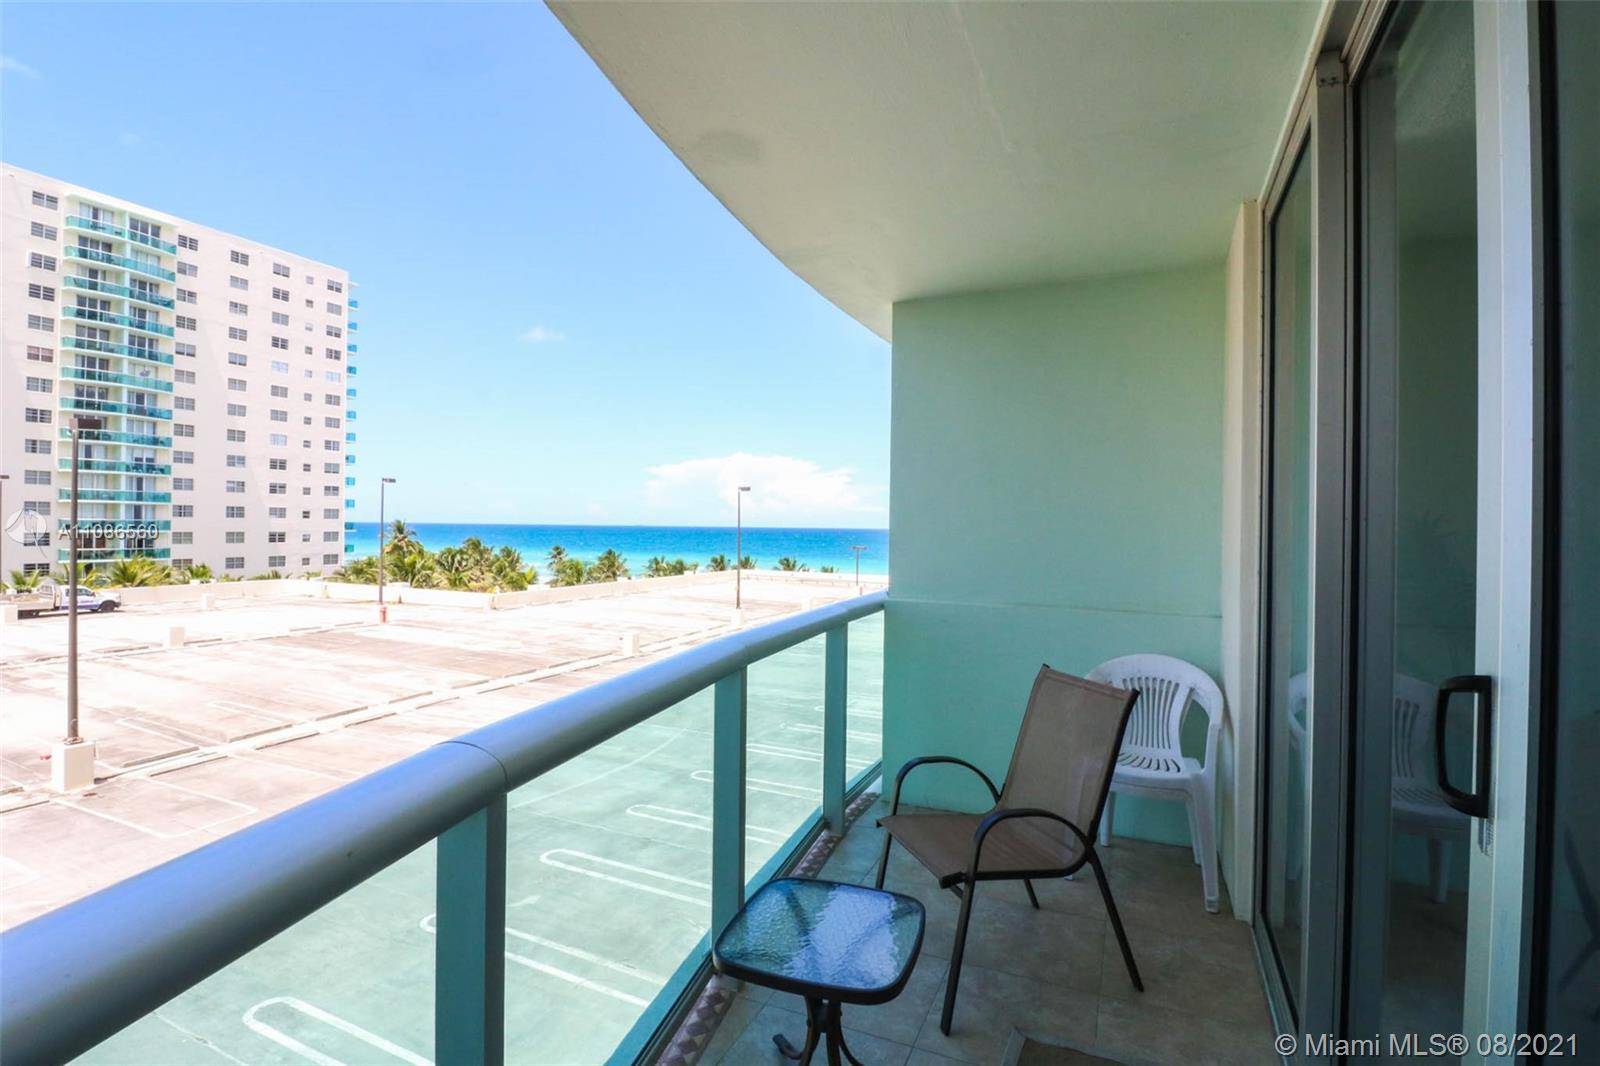 Own an oceanfront condo without over paying.